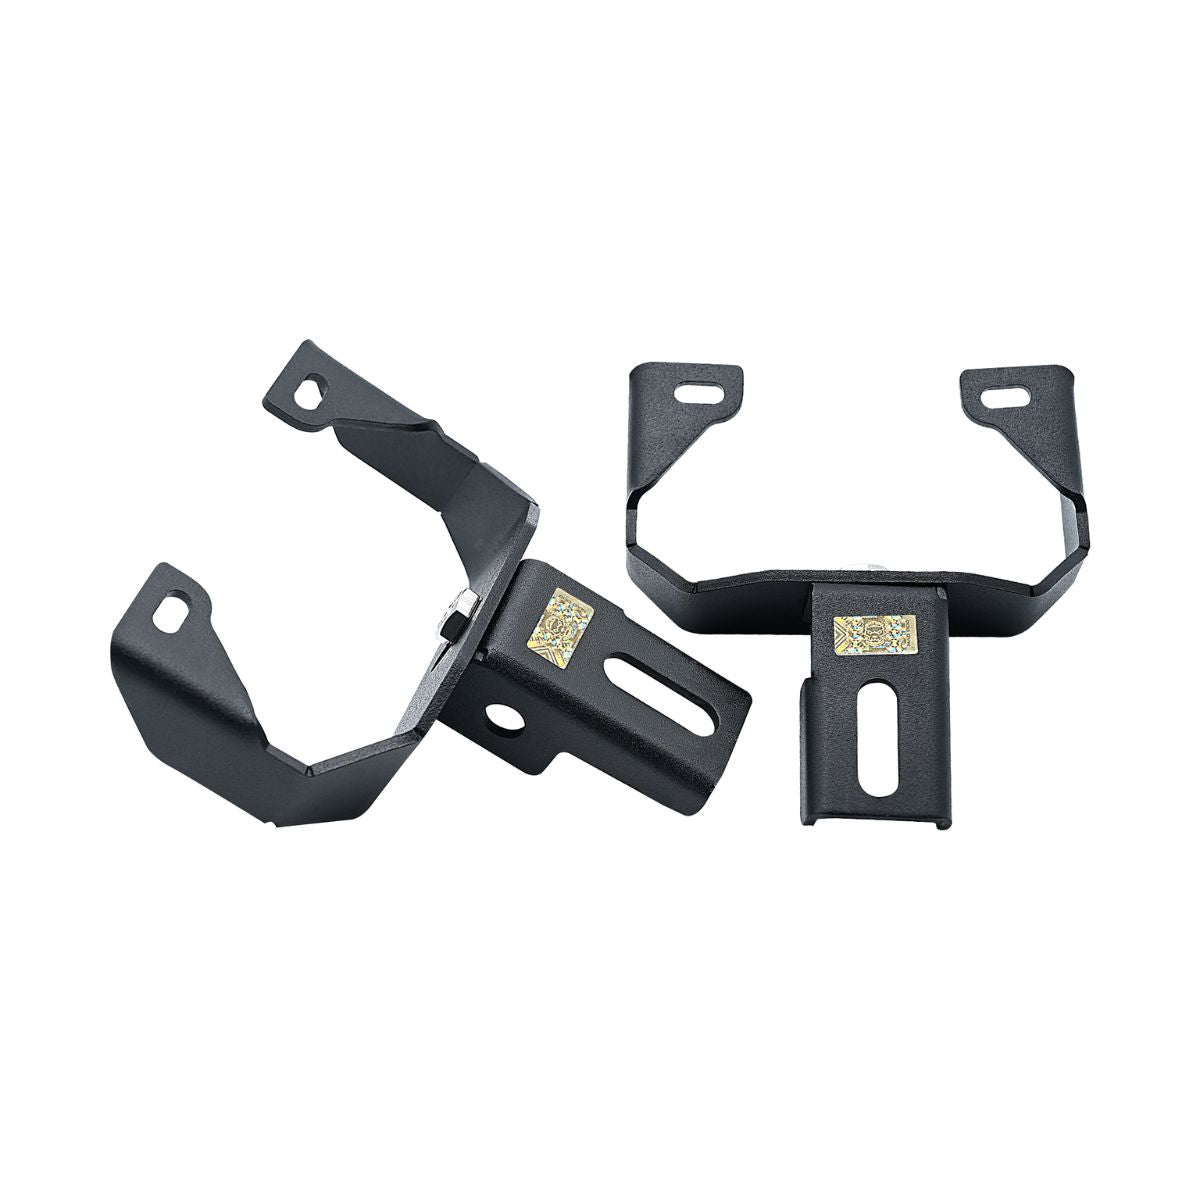 Fork Clamps for Hero Xpulse 200 1